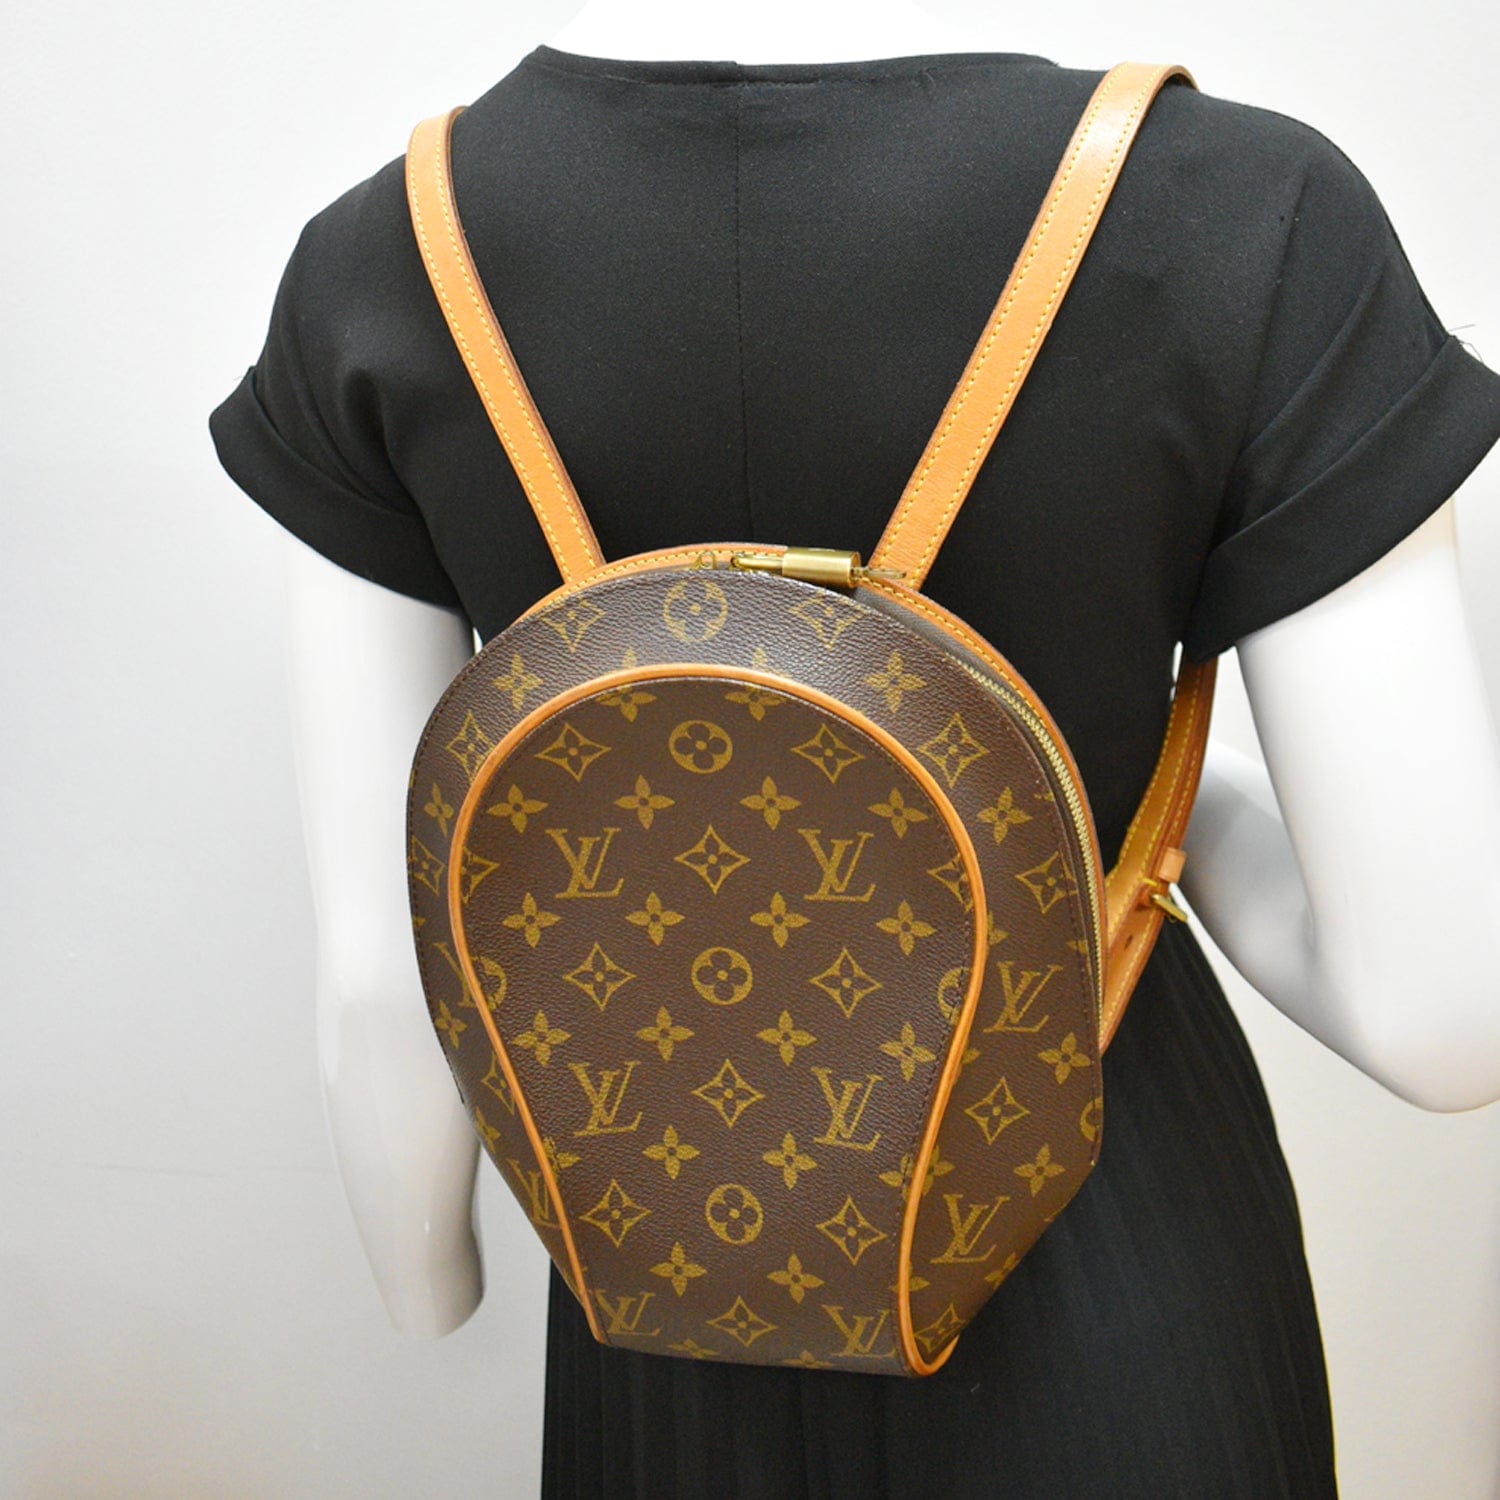 Ellipse leather backpack Louis Vuitton Brown in Leather - 35211694